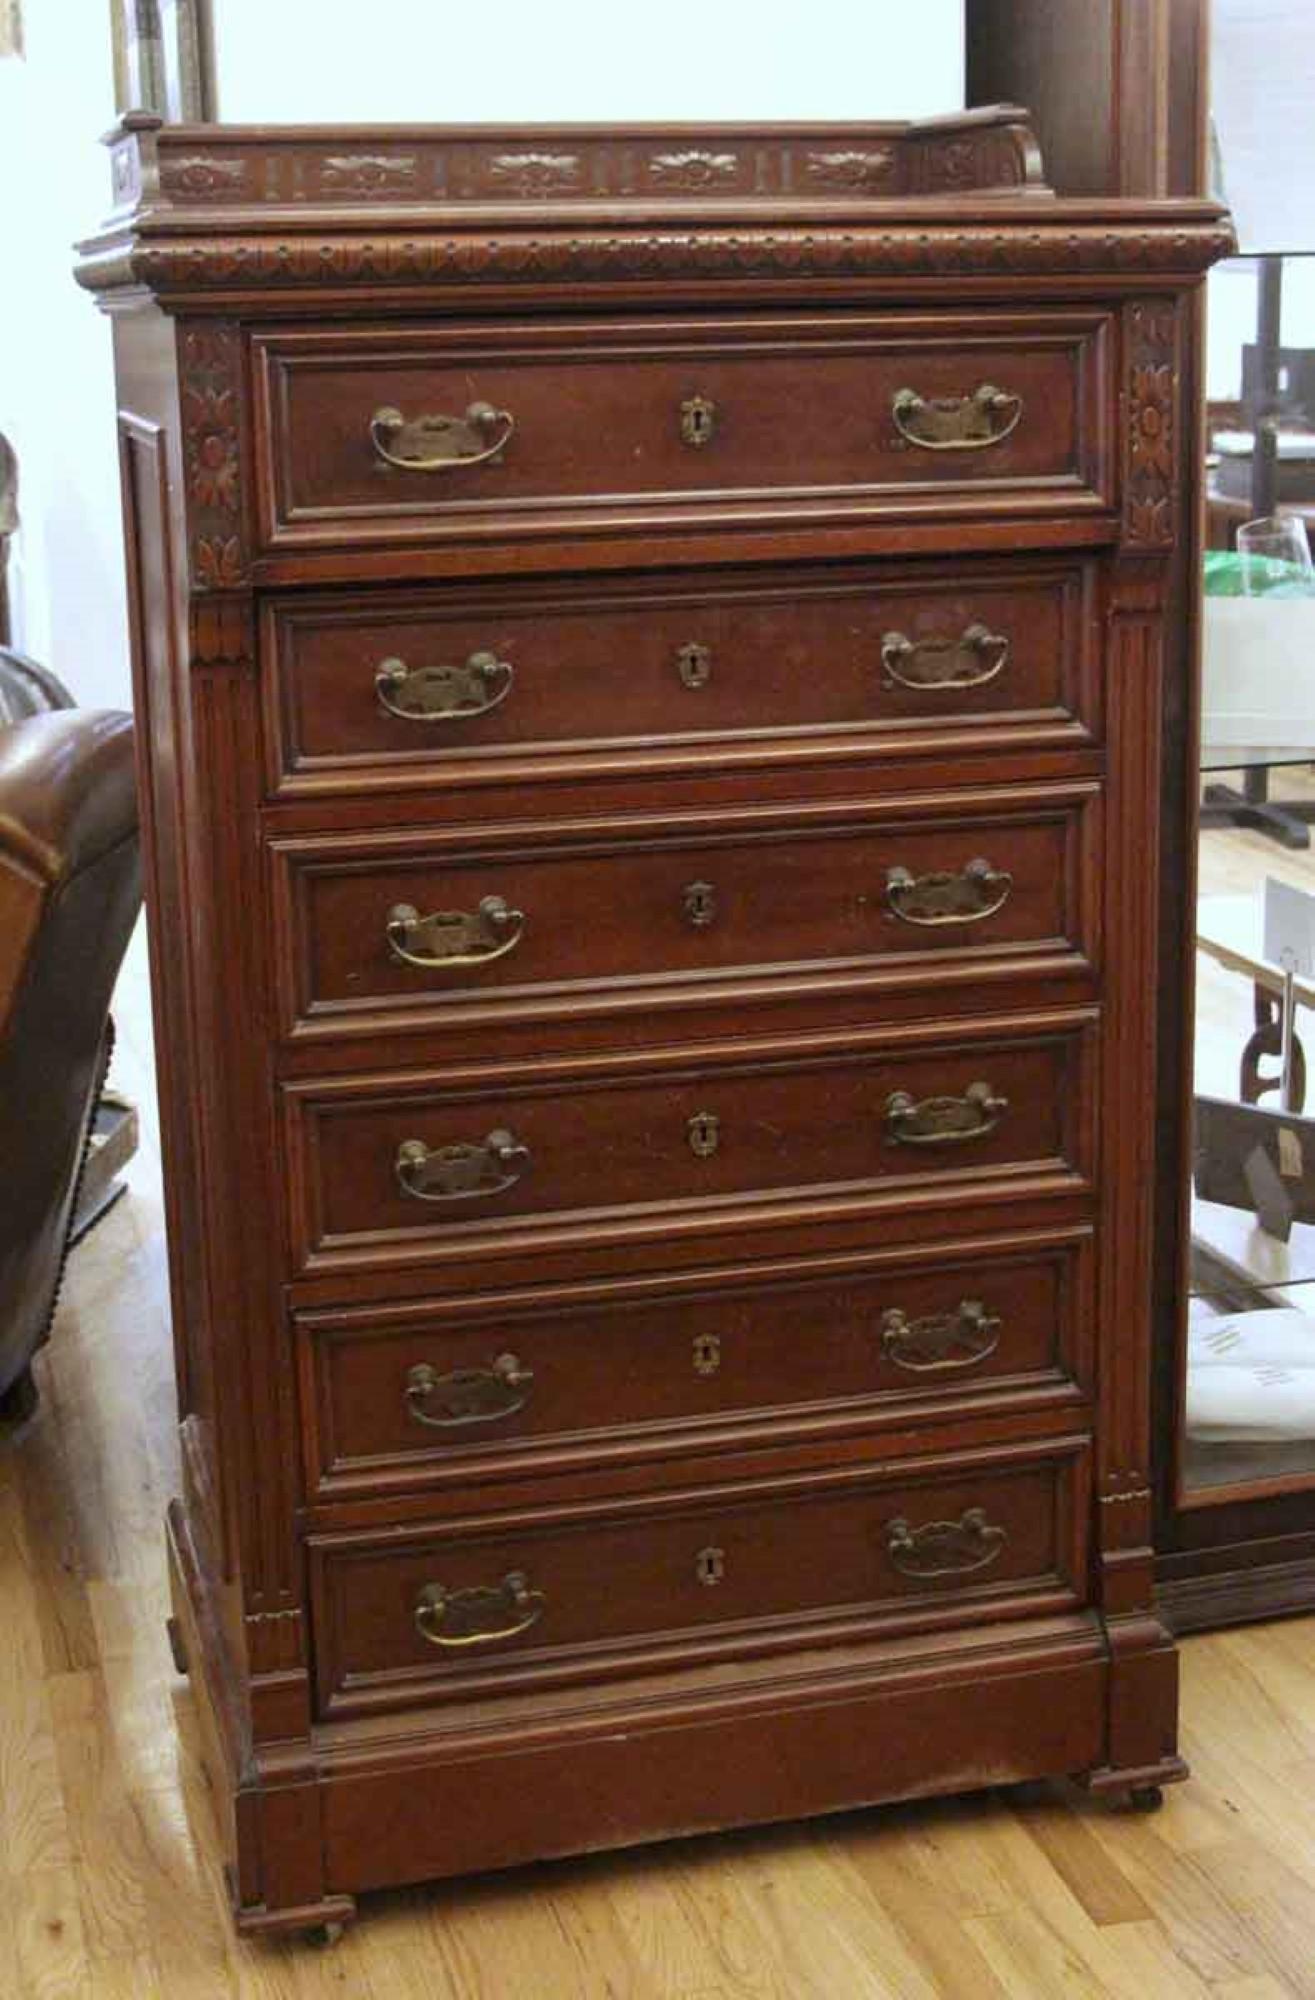 1870s dark tone six-drawer antique mahogany tall boy dresser with decorative carved details. Top drawer has six adjustable compartments. Small crack in one drawer on bottom. Key works on every drawer but the 2nd. This can be seen at our 333 West